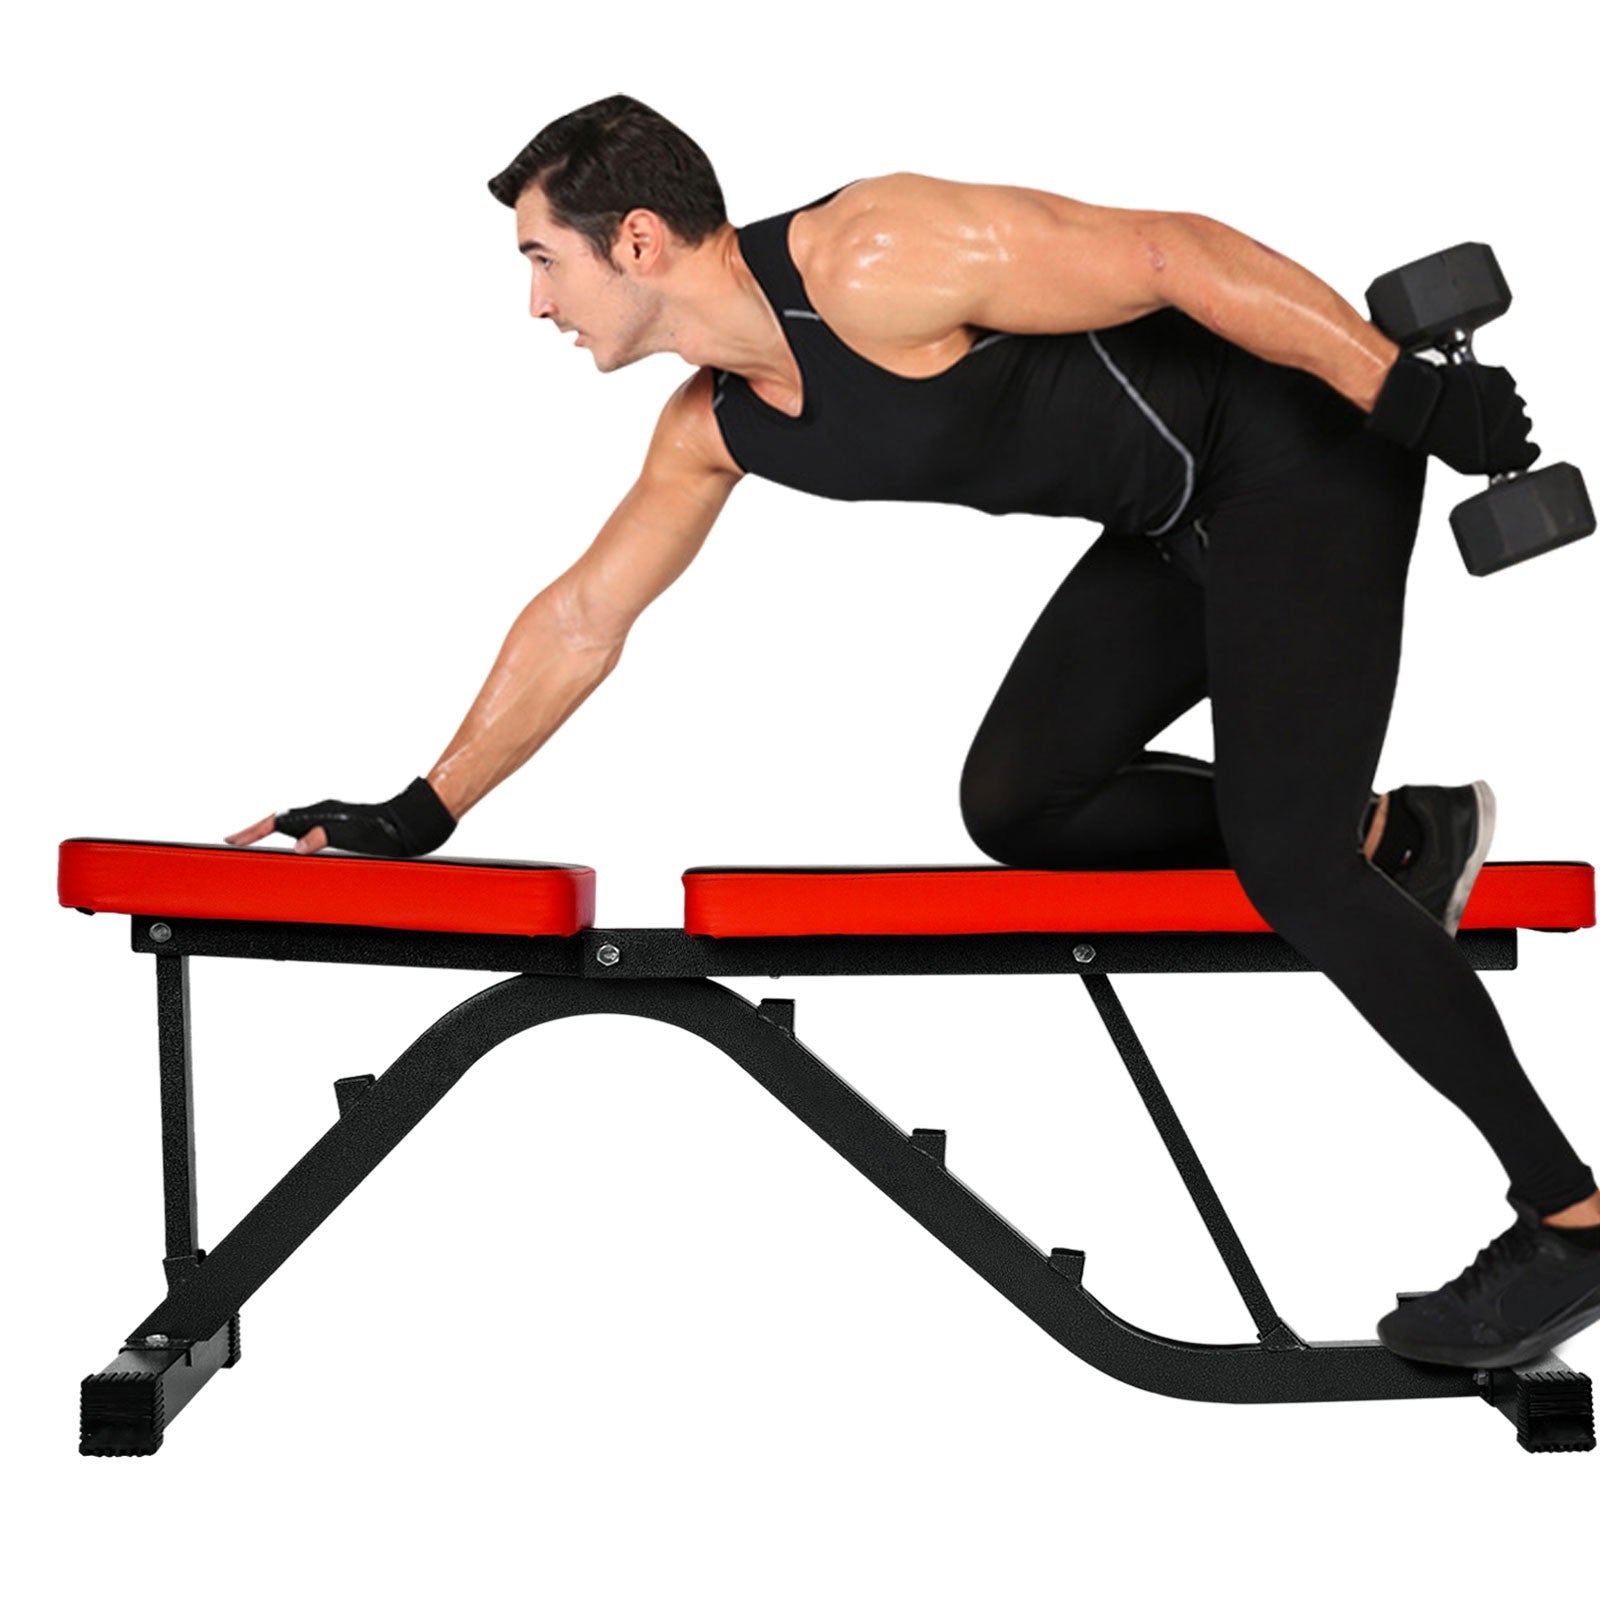 Adjustable Drop Home Fitness Multifunctional Weight-Loss Bed Dumbbell Bench